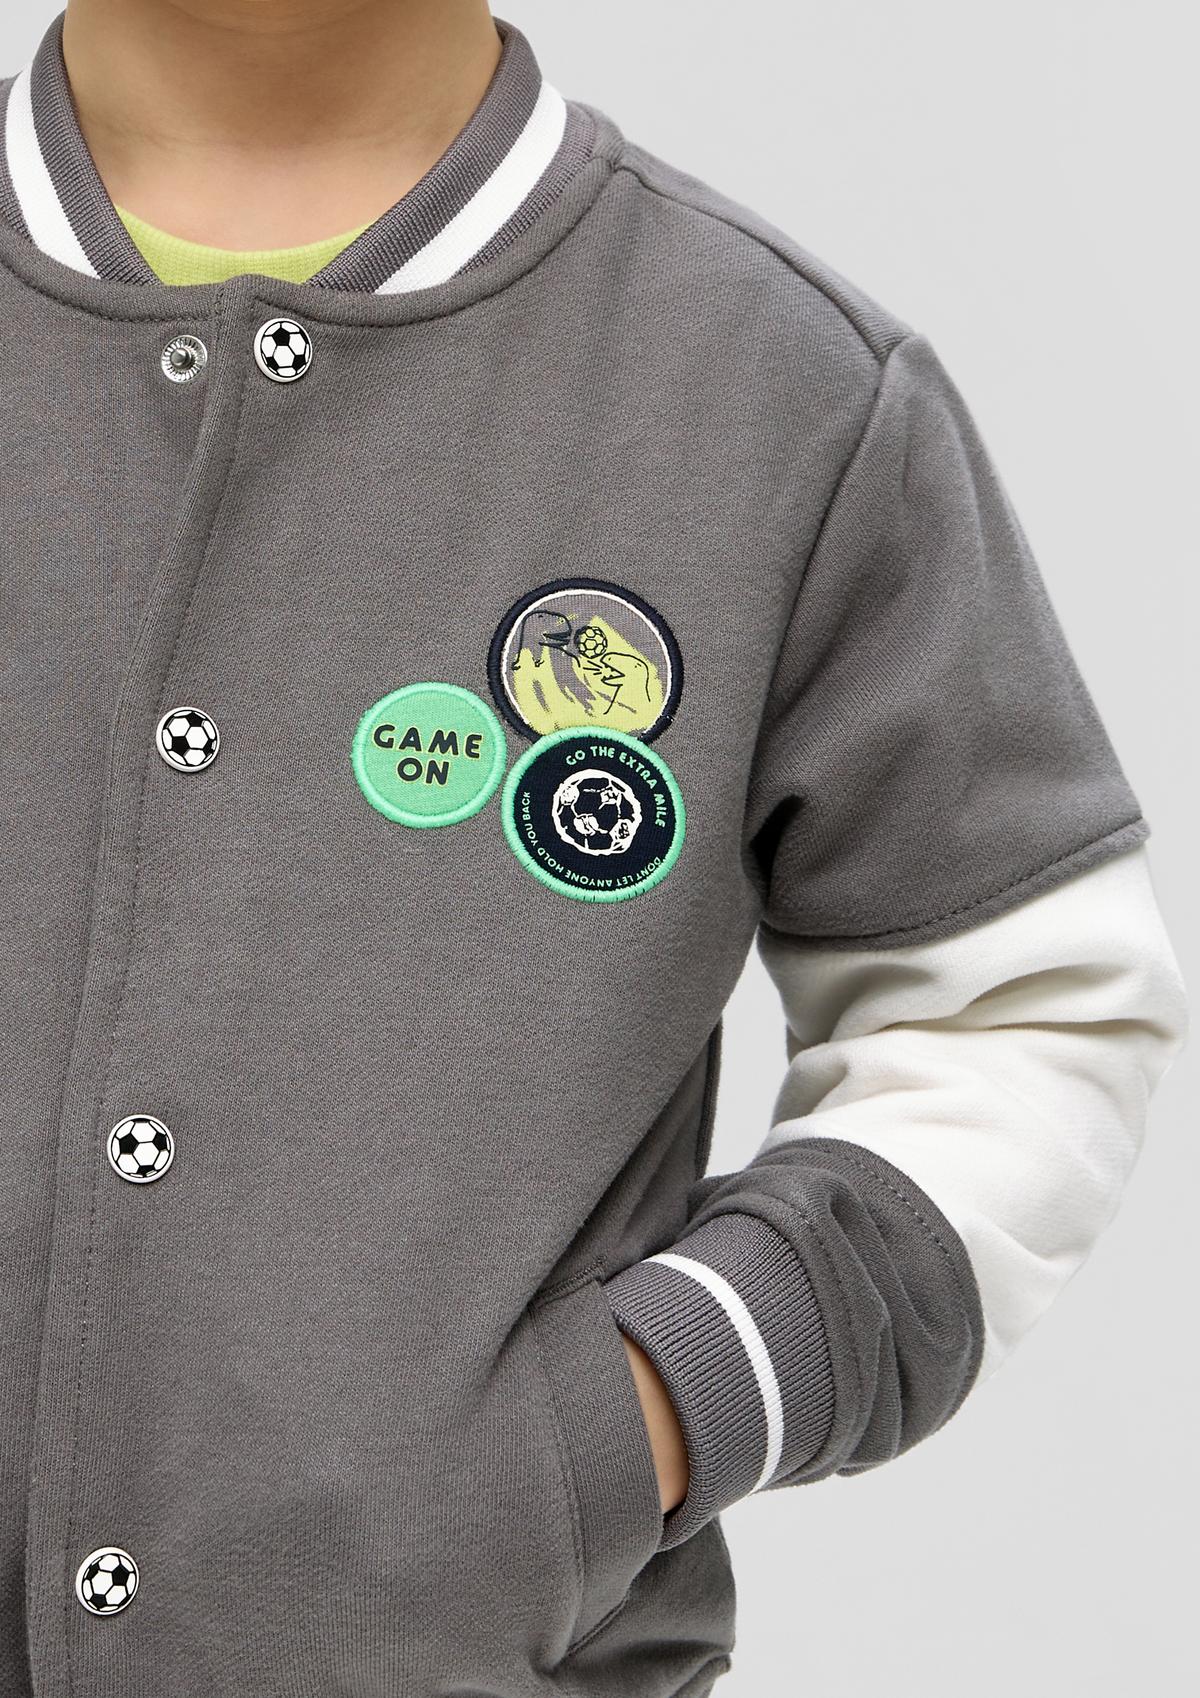 s.Oliver Sweatshirt jacket with football buttons